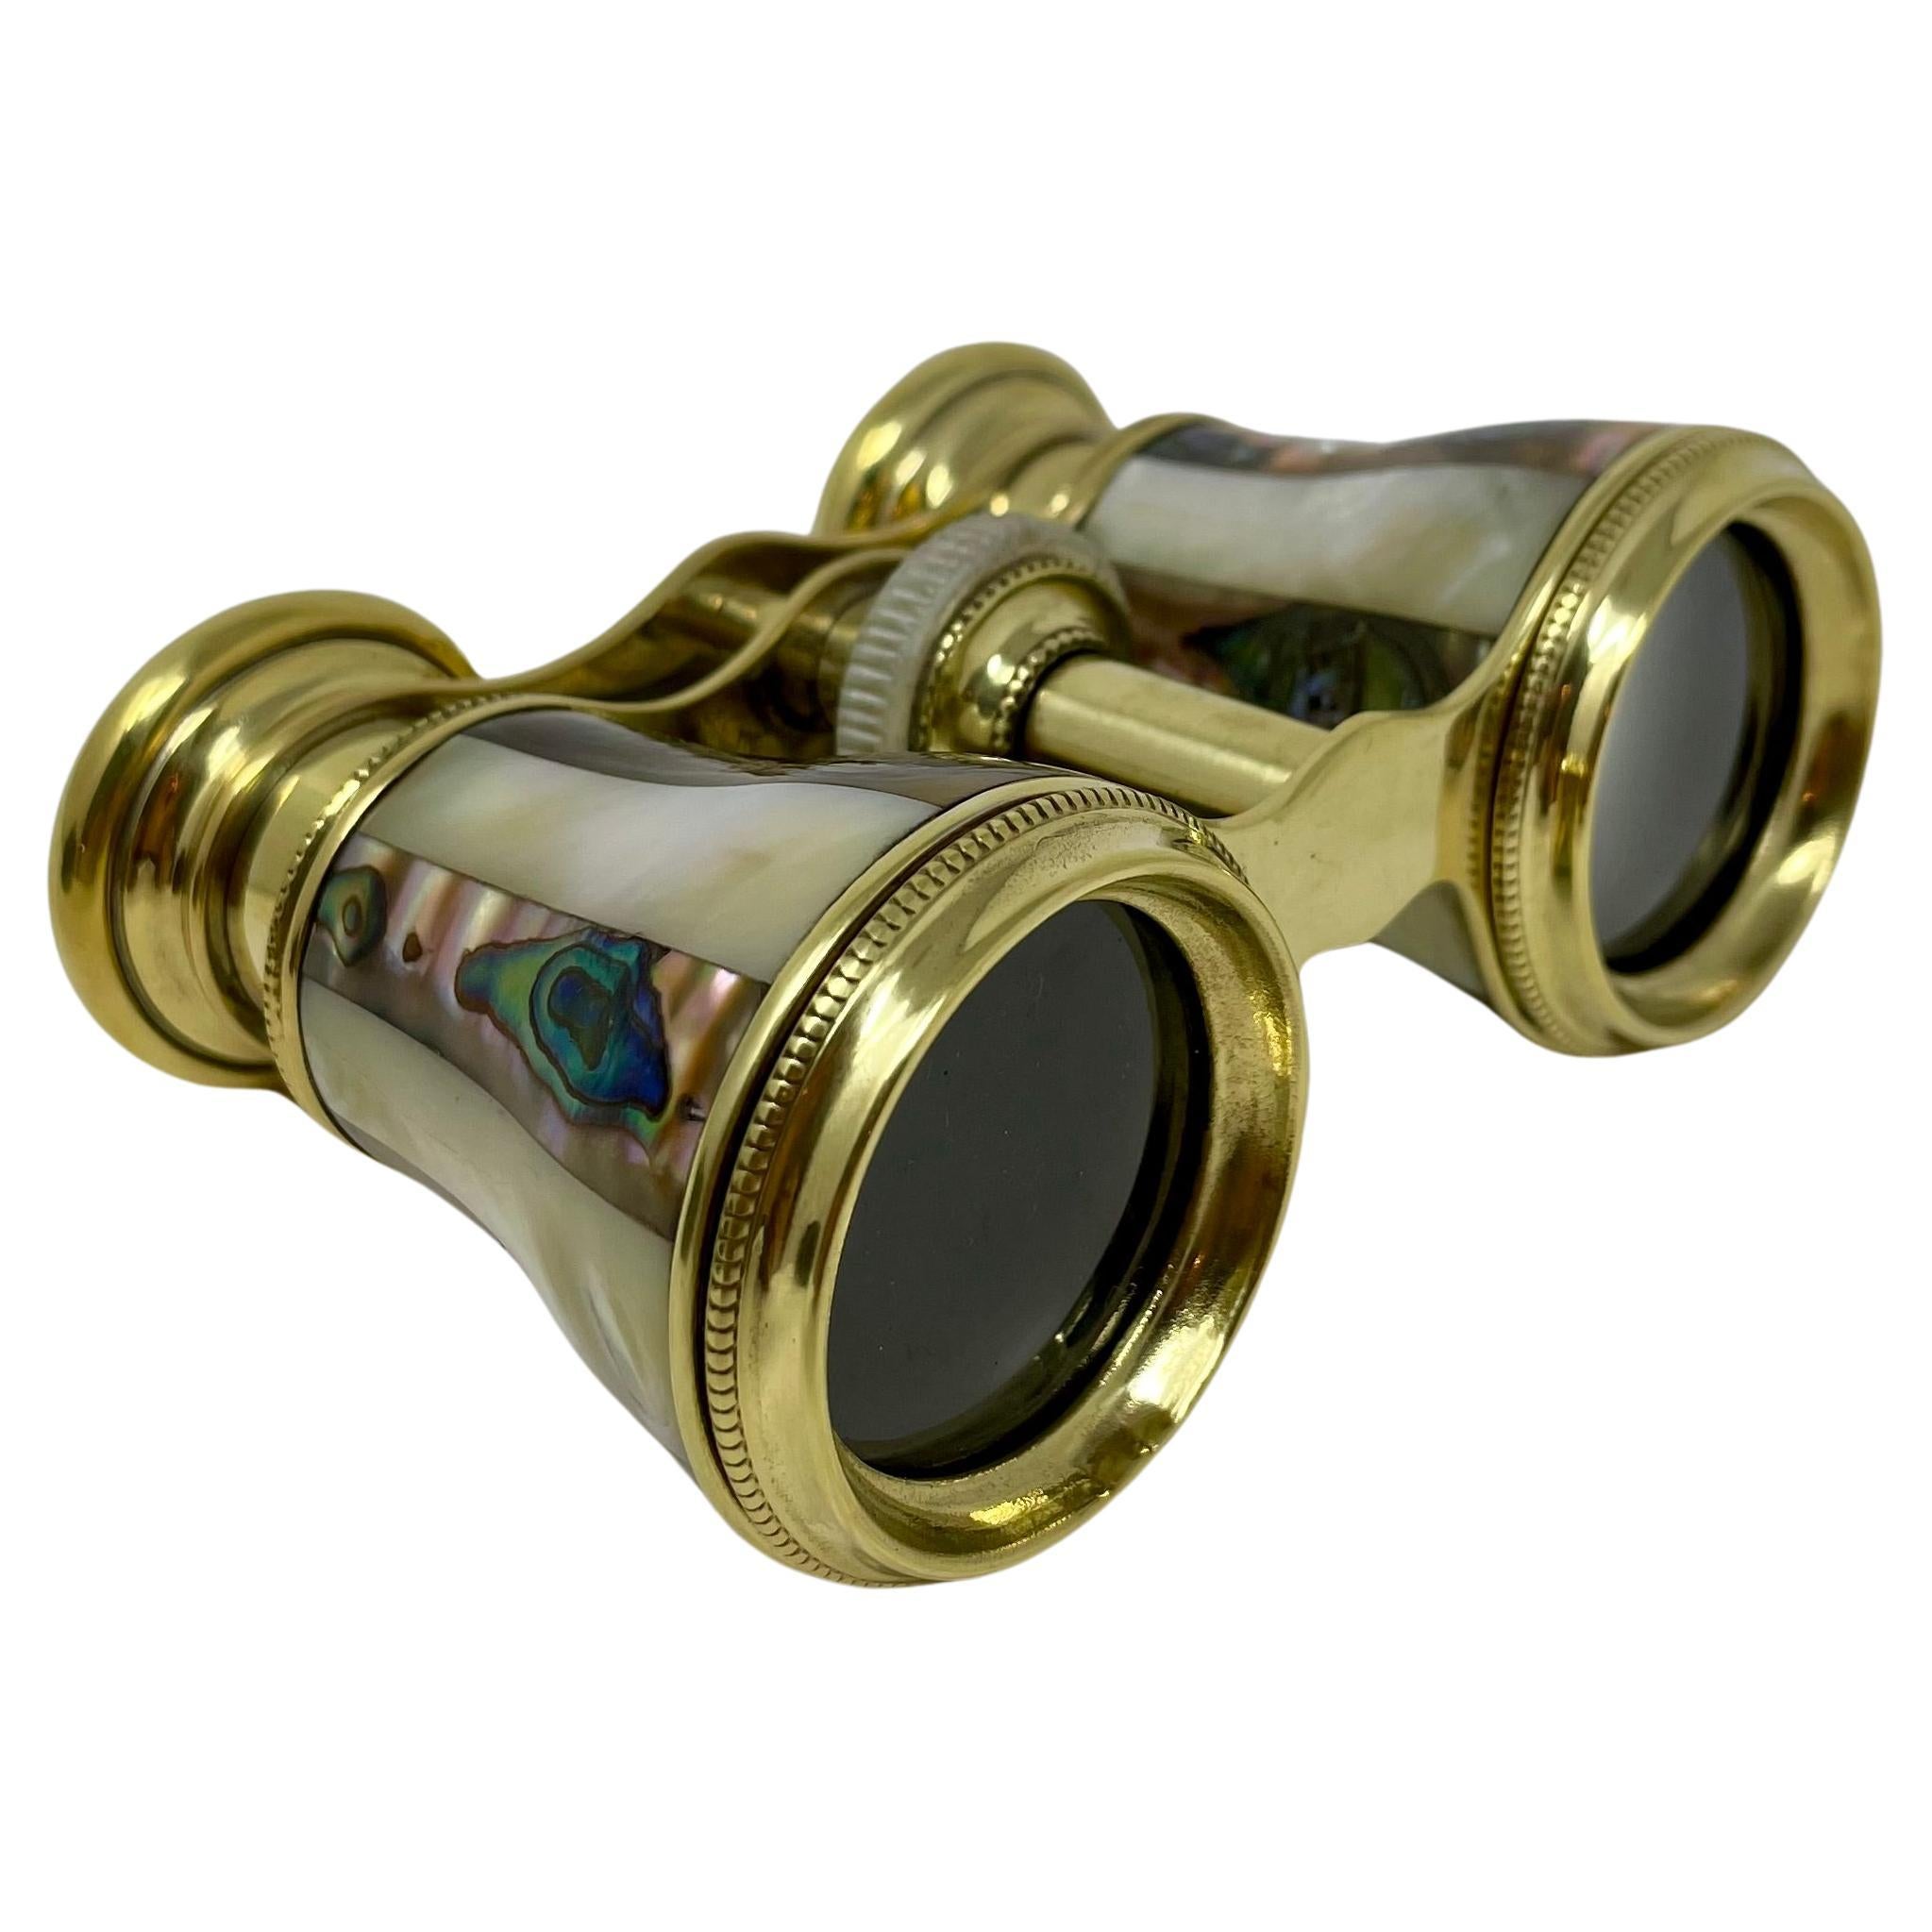 19th Century Antique French Parisian Mother-of-Pearl & Abalone Opera Glasses, Circa 1890.